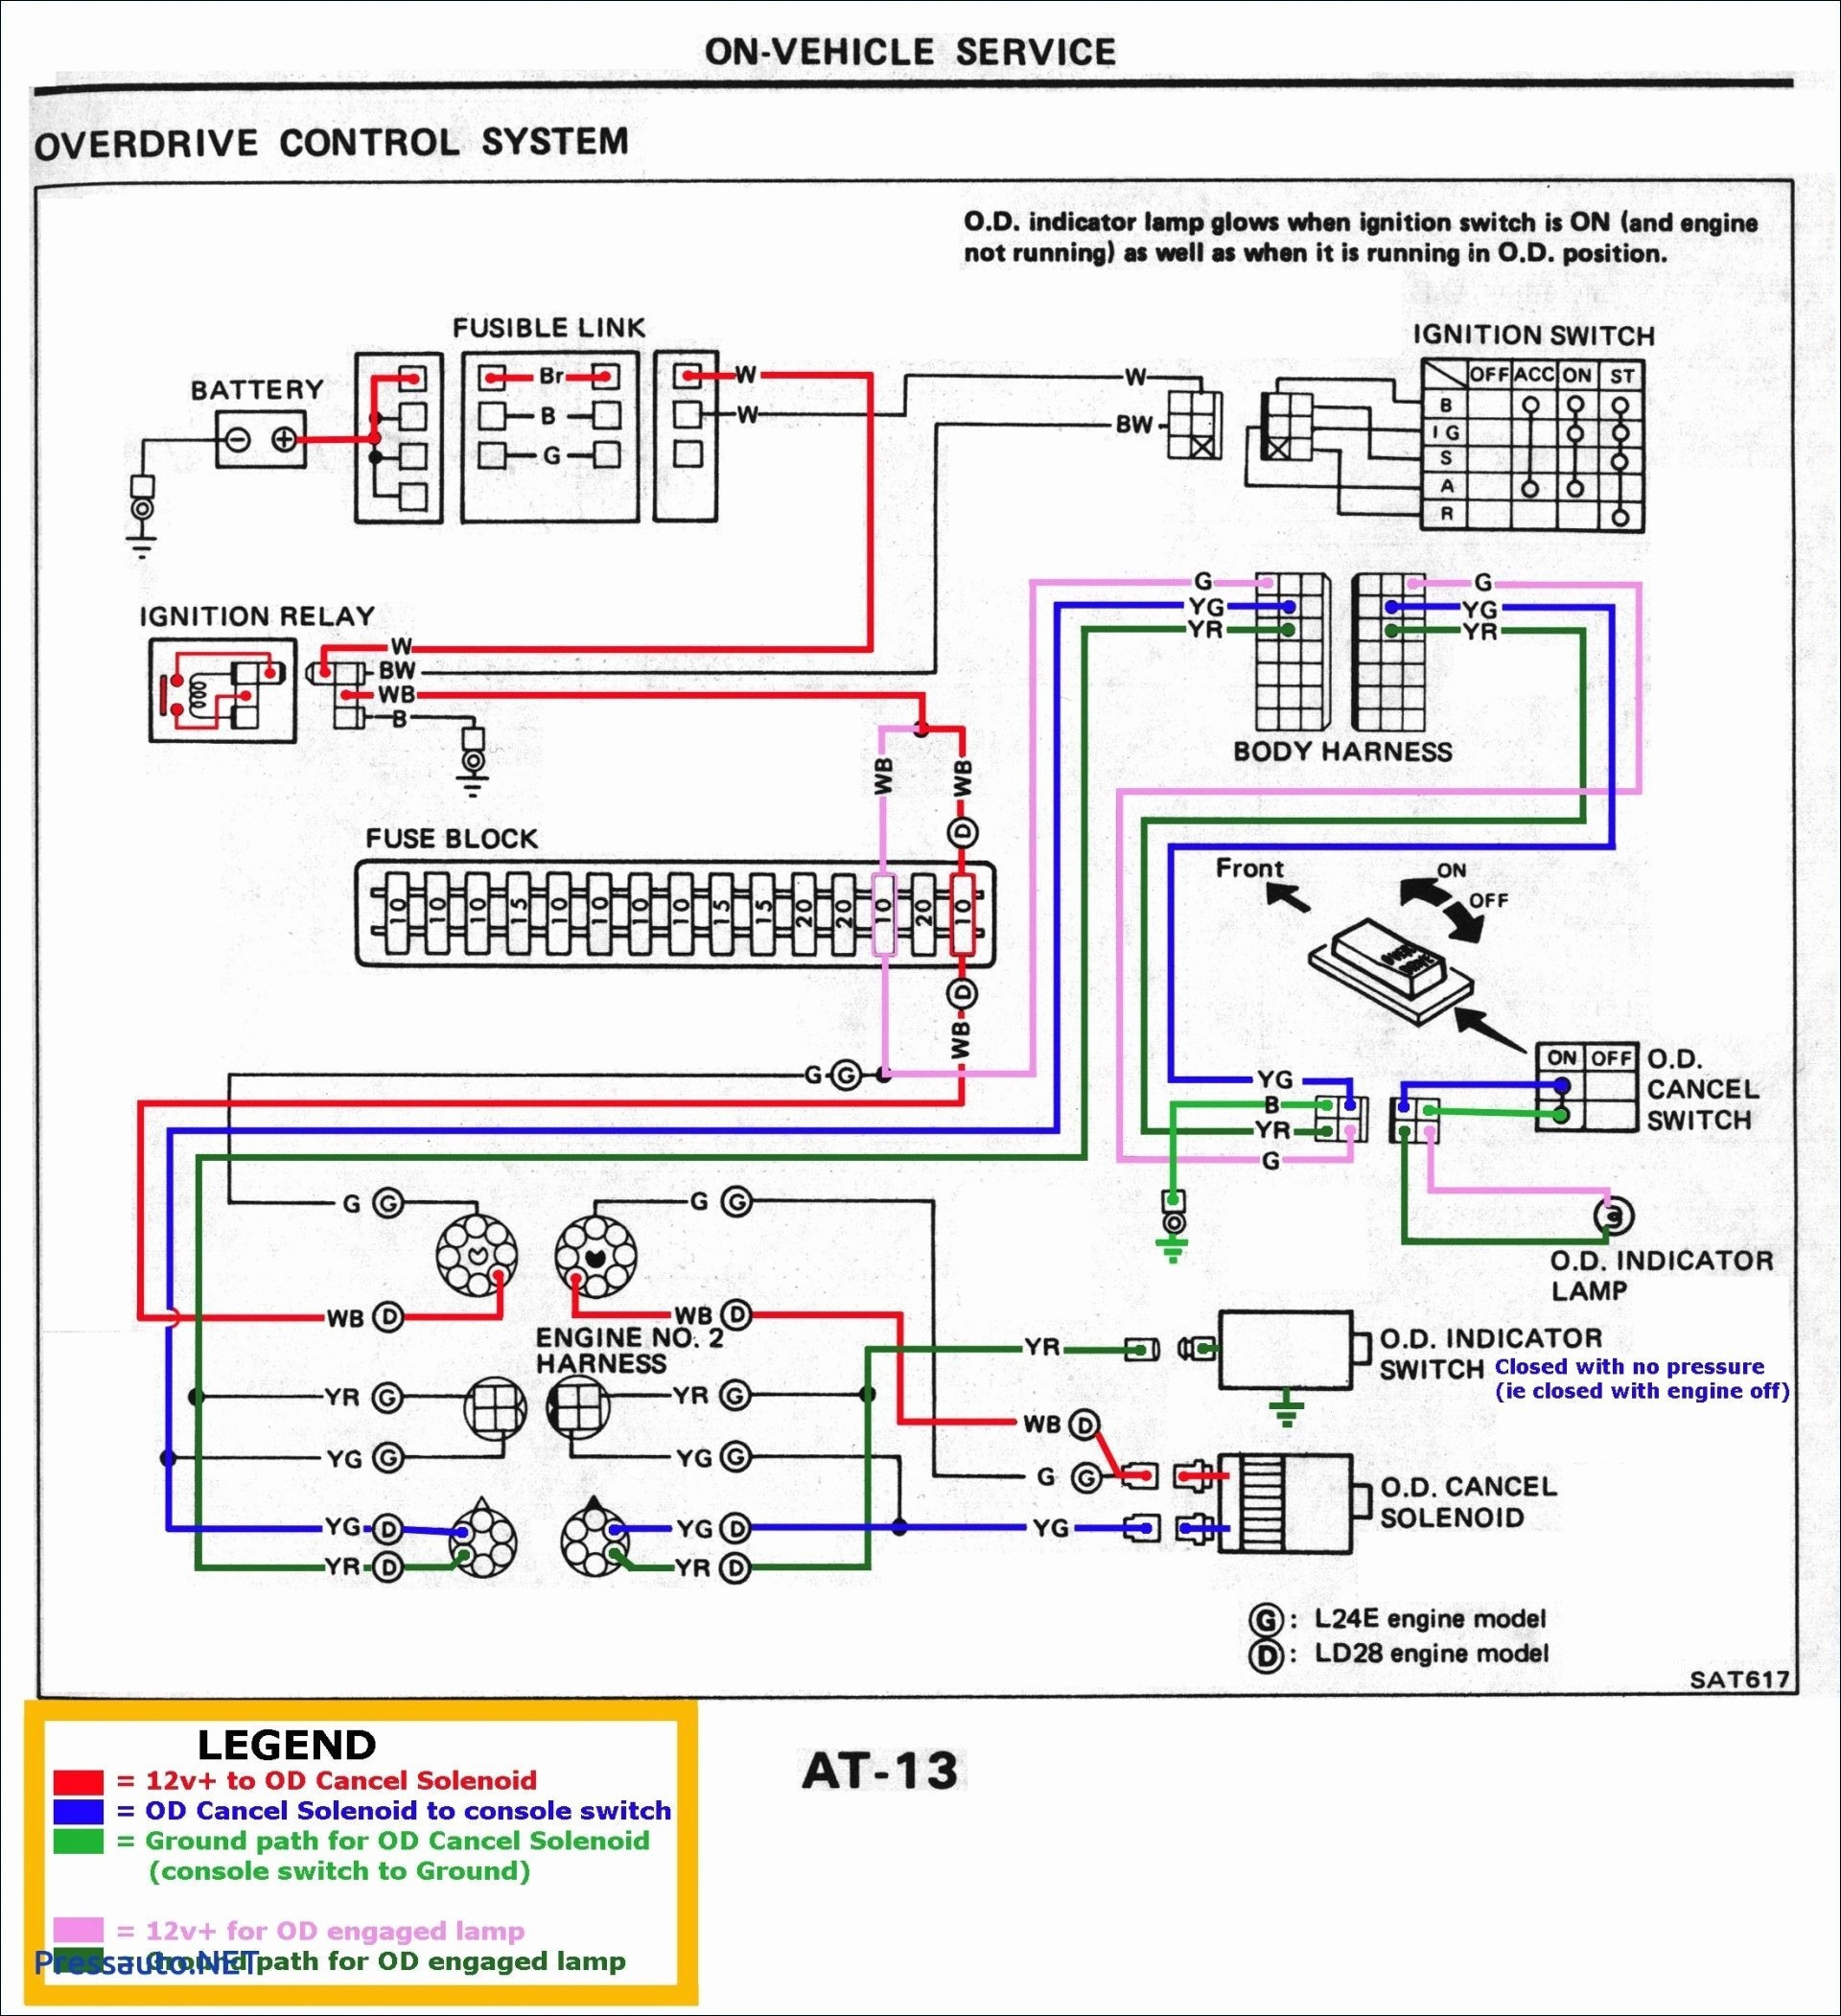 S1 Switch Wiring Diagram 00b3f54 Wiring Diagram for Time Delay Relay Of S1 Switch Wiring Diagram